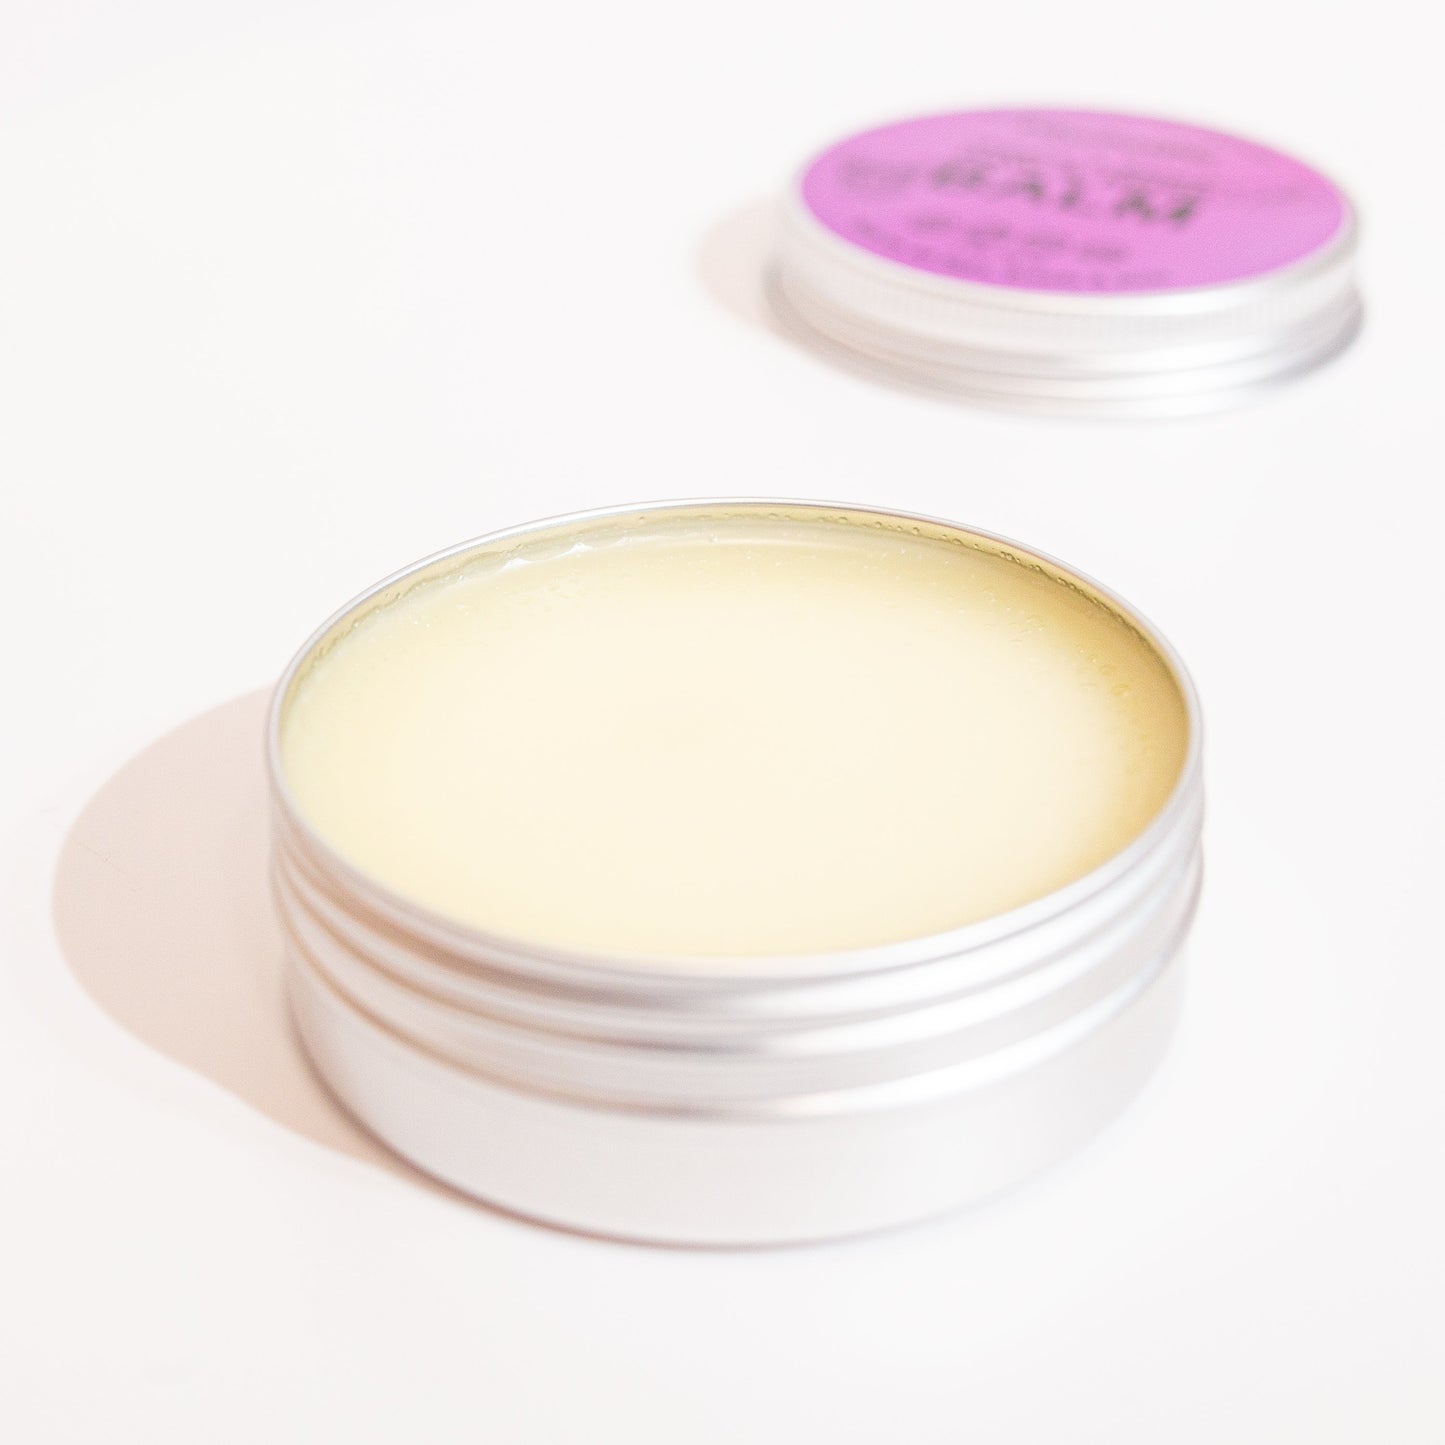 Dog Paw Balm with Shea Butter and Coconut Oil